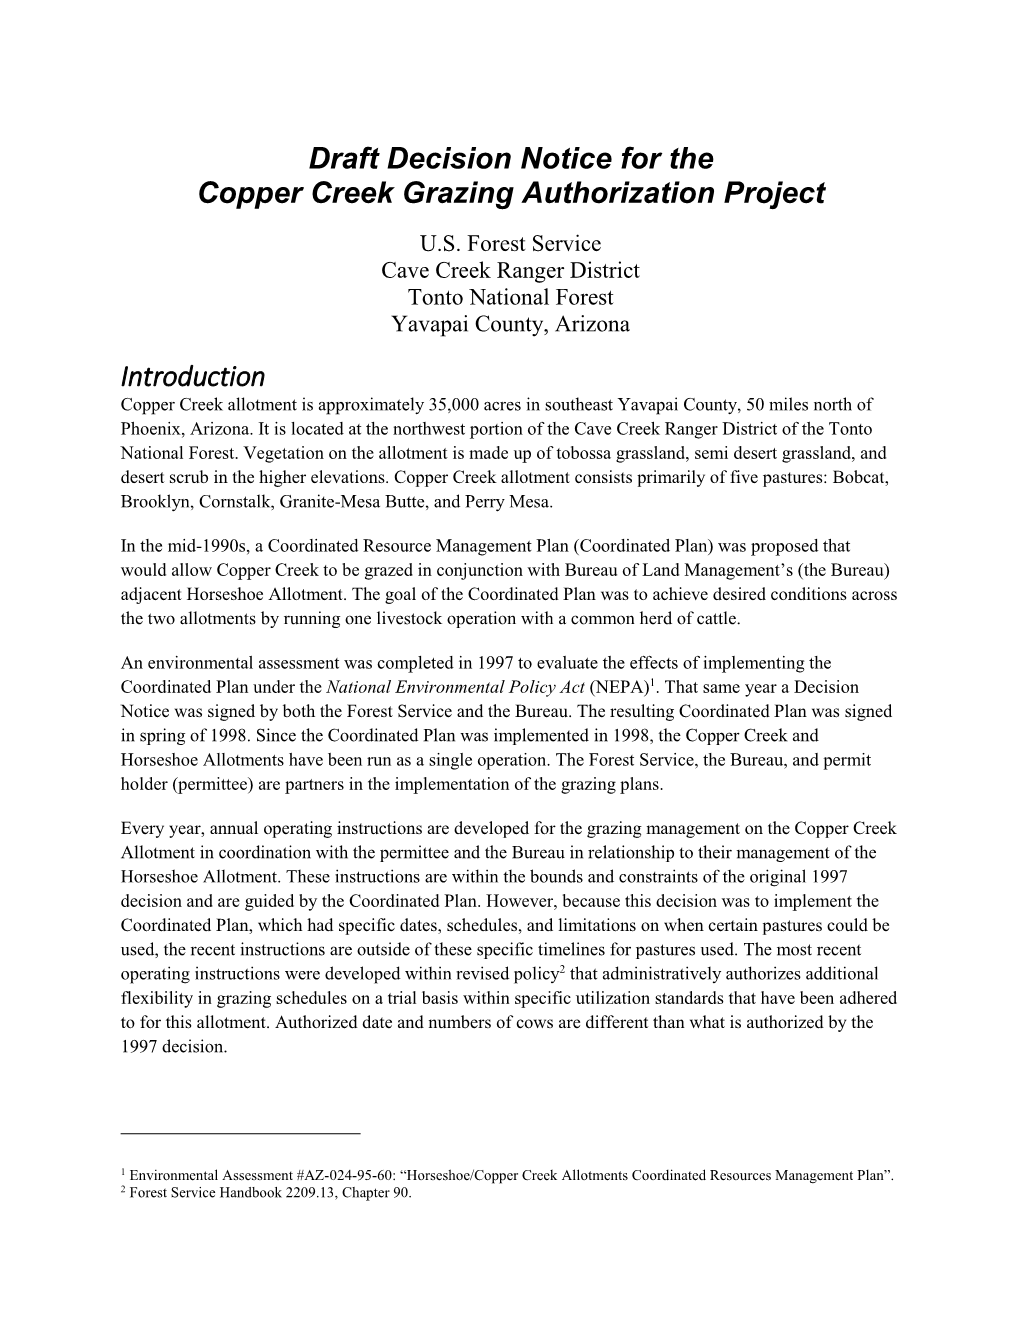 Decision Notice for the Copper Creek Grazing Authorization Project U.S